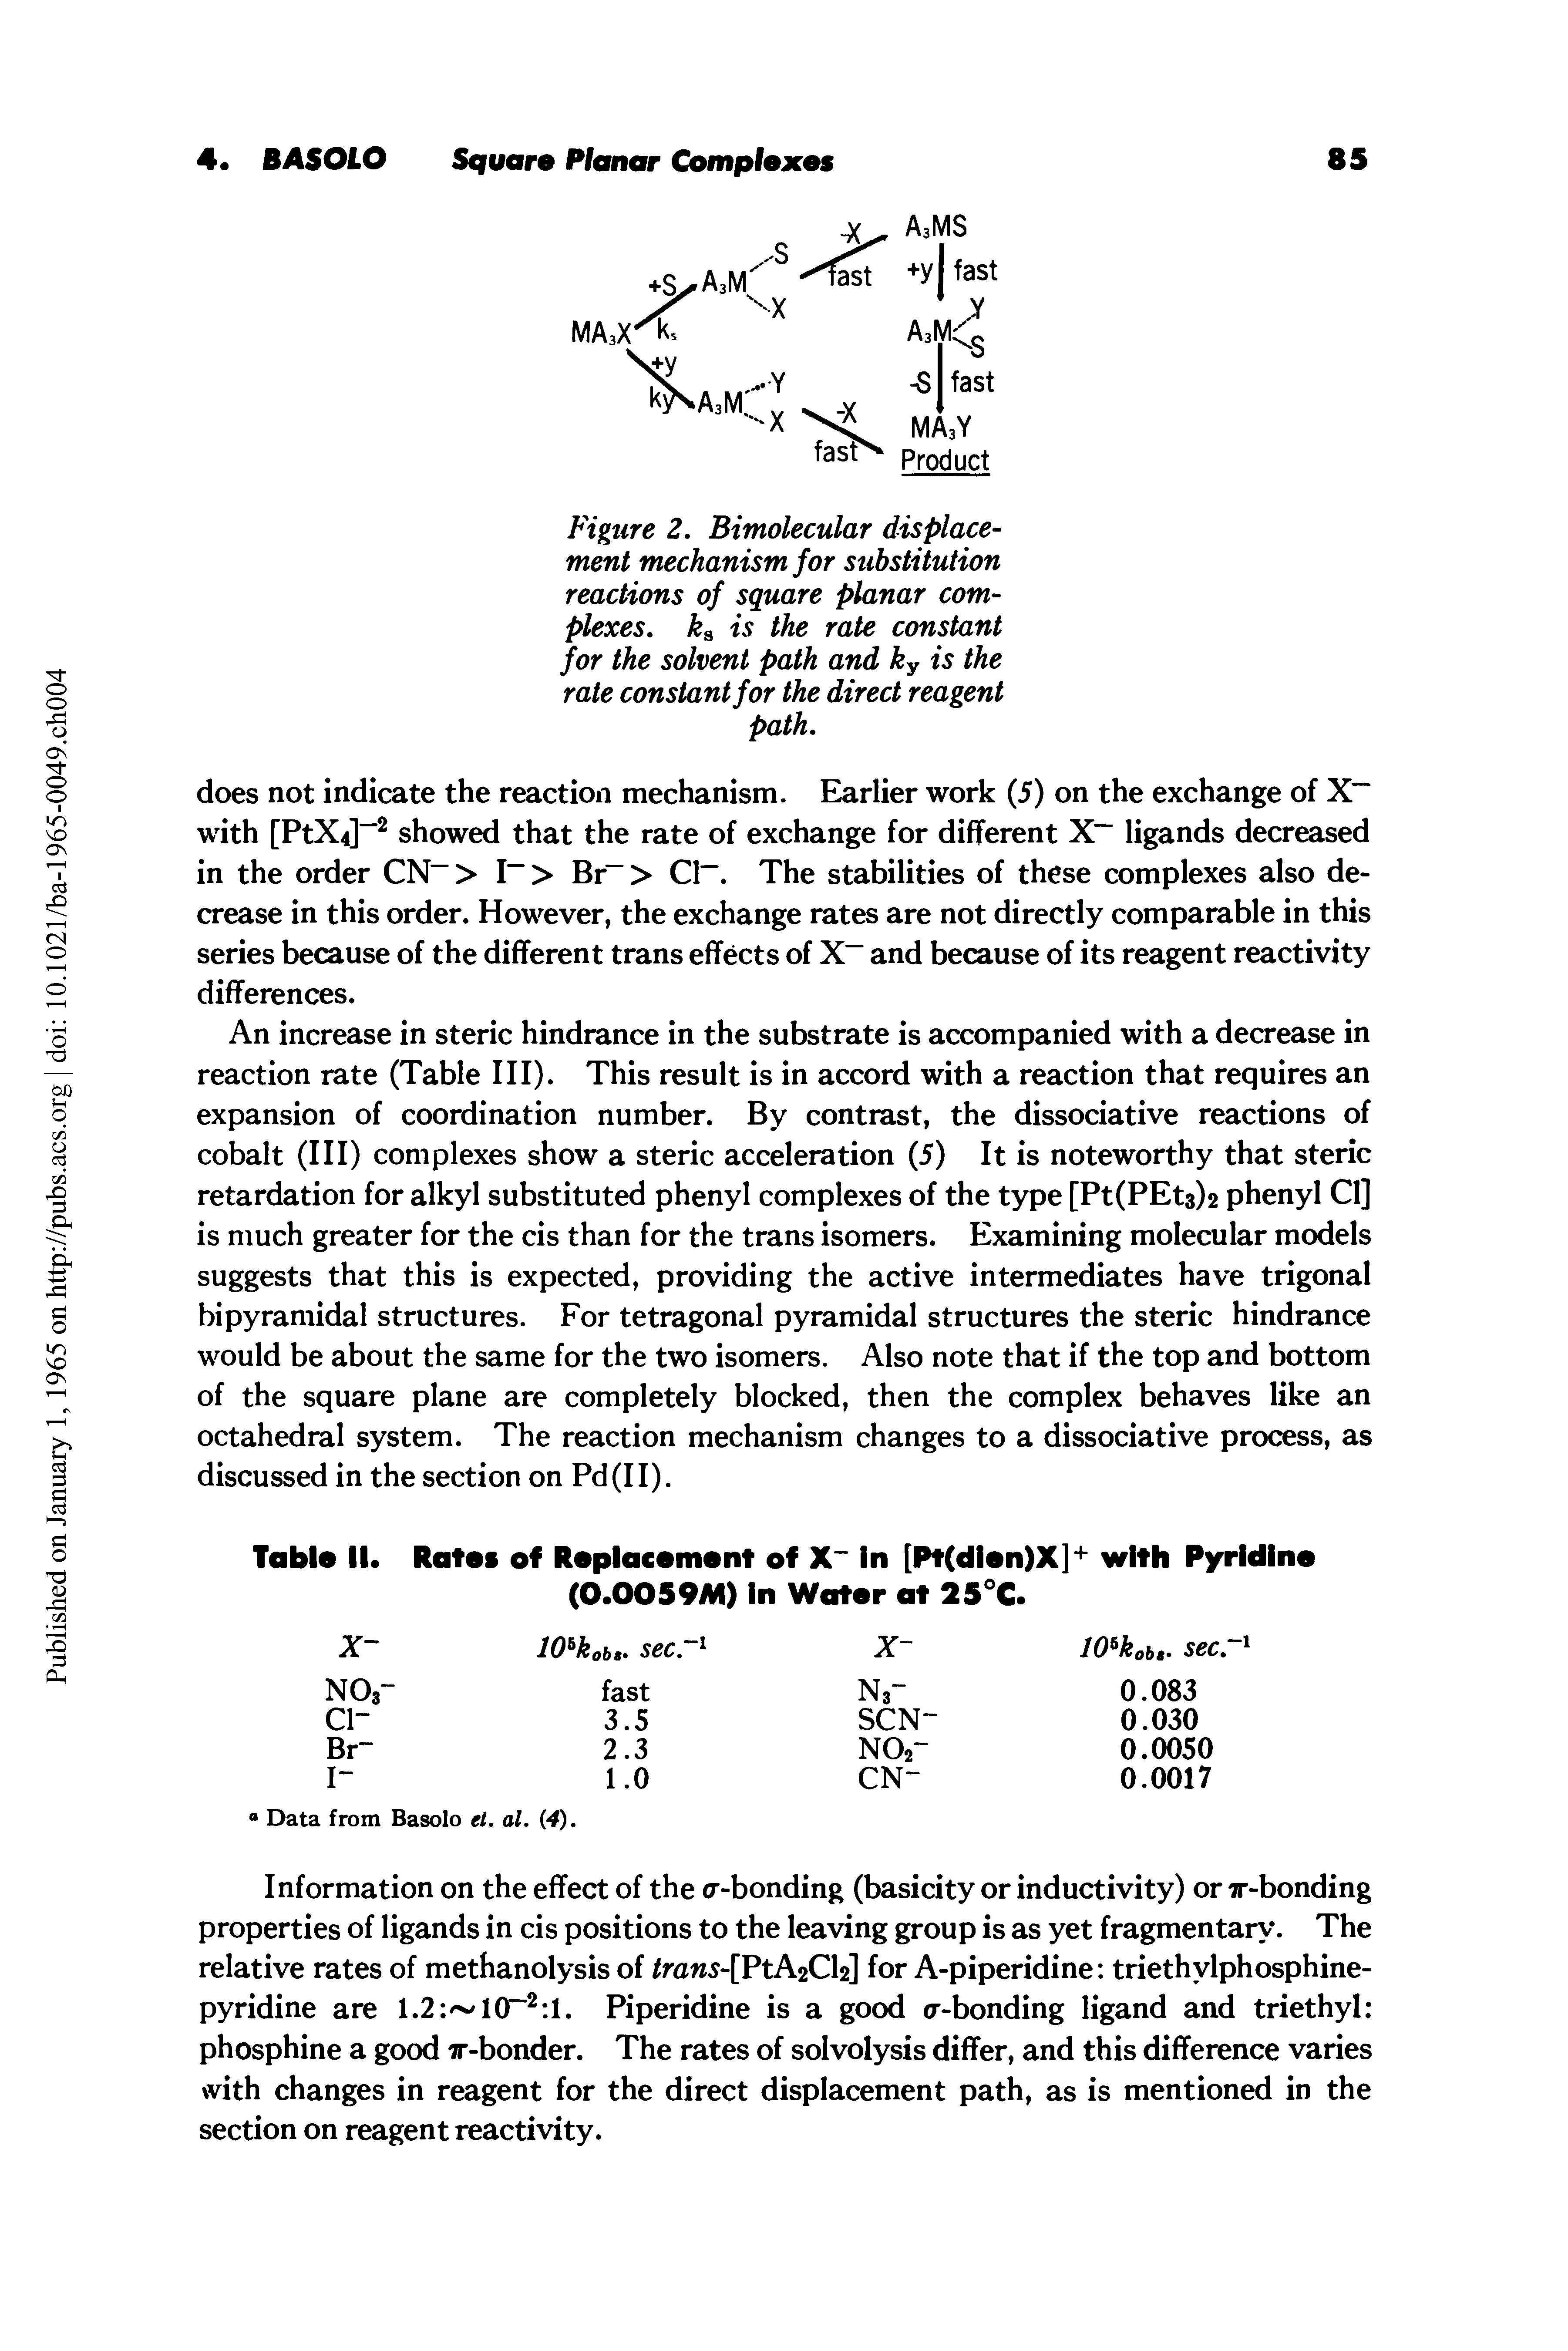 Figure 2. Bimolecular displacement mechanism for substitution reactions of square planar complexes. ka is the rate constant for the solvent path and ky is the rate constant for the direct reagent path.